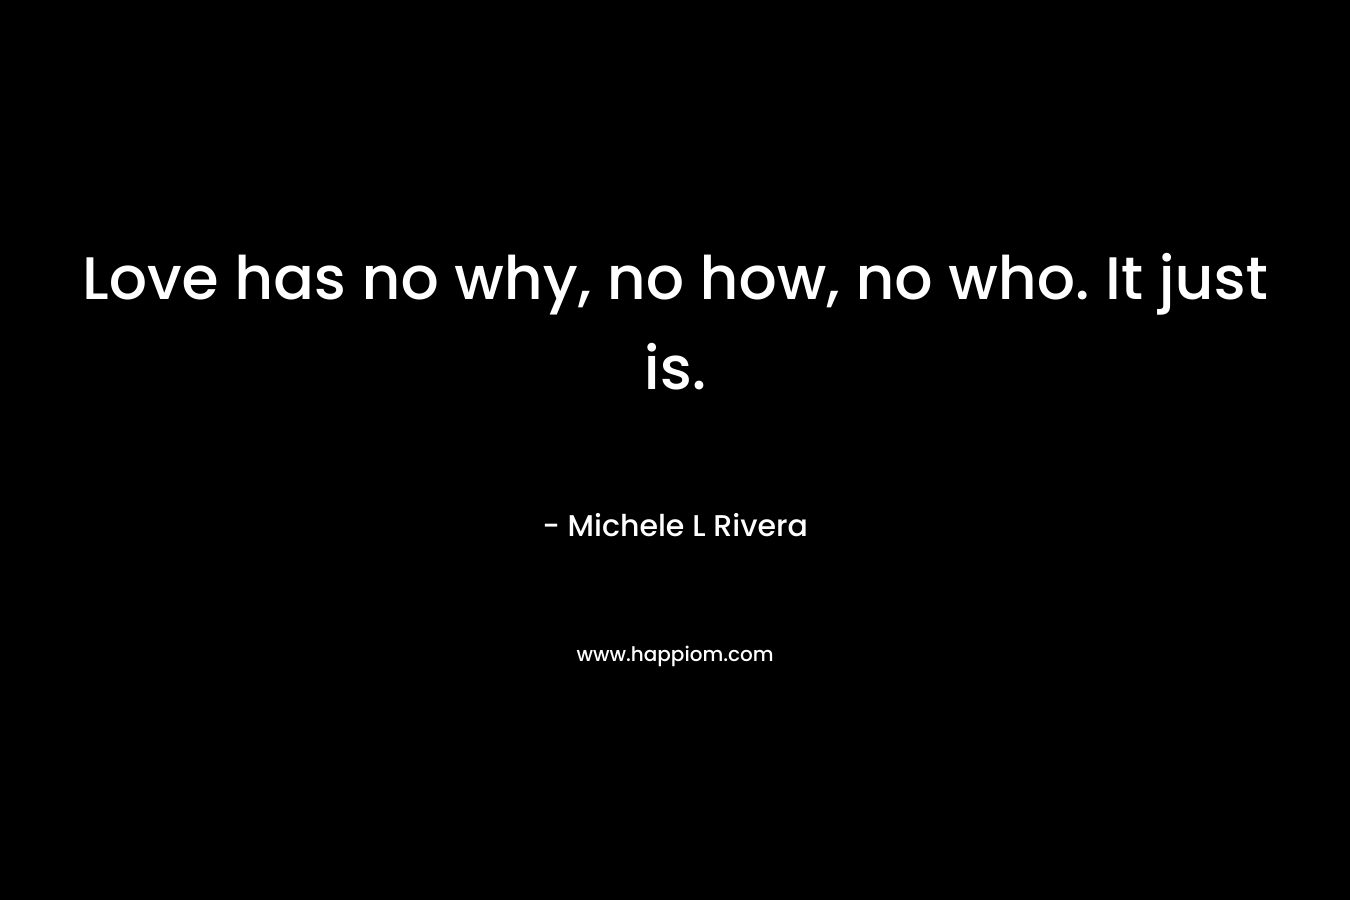 Love has no why, no how, no who. It just is. – Michele L Rivera